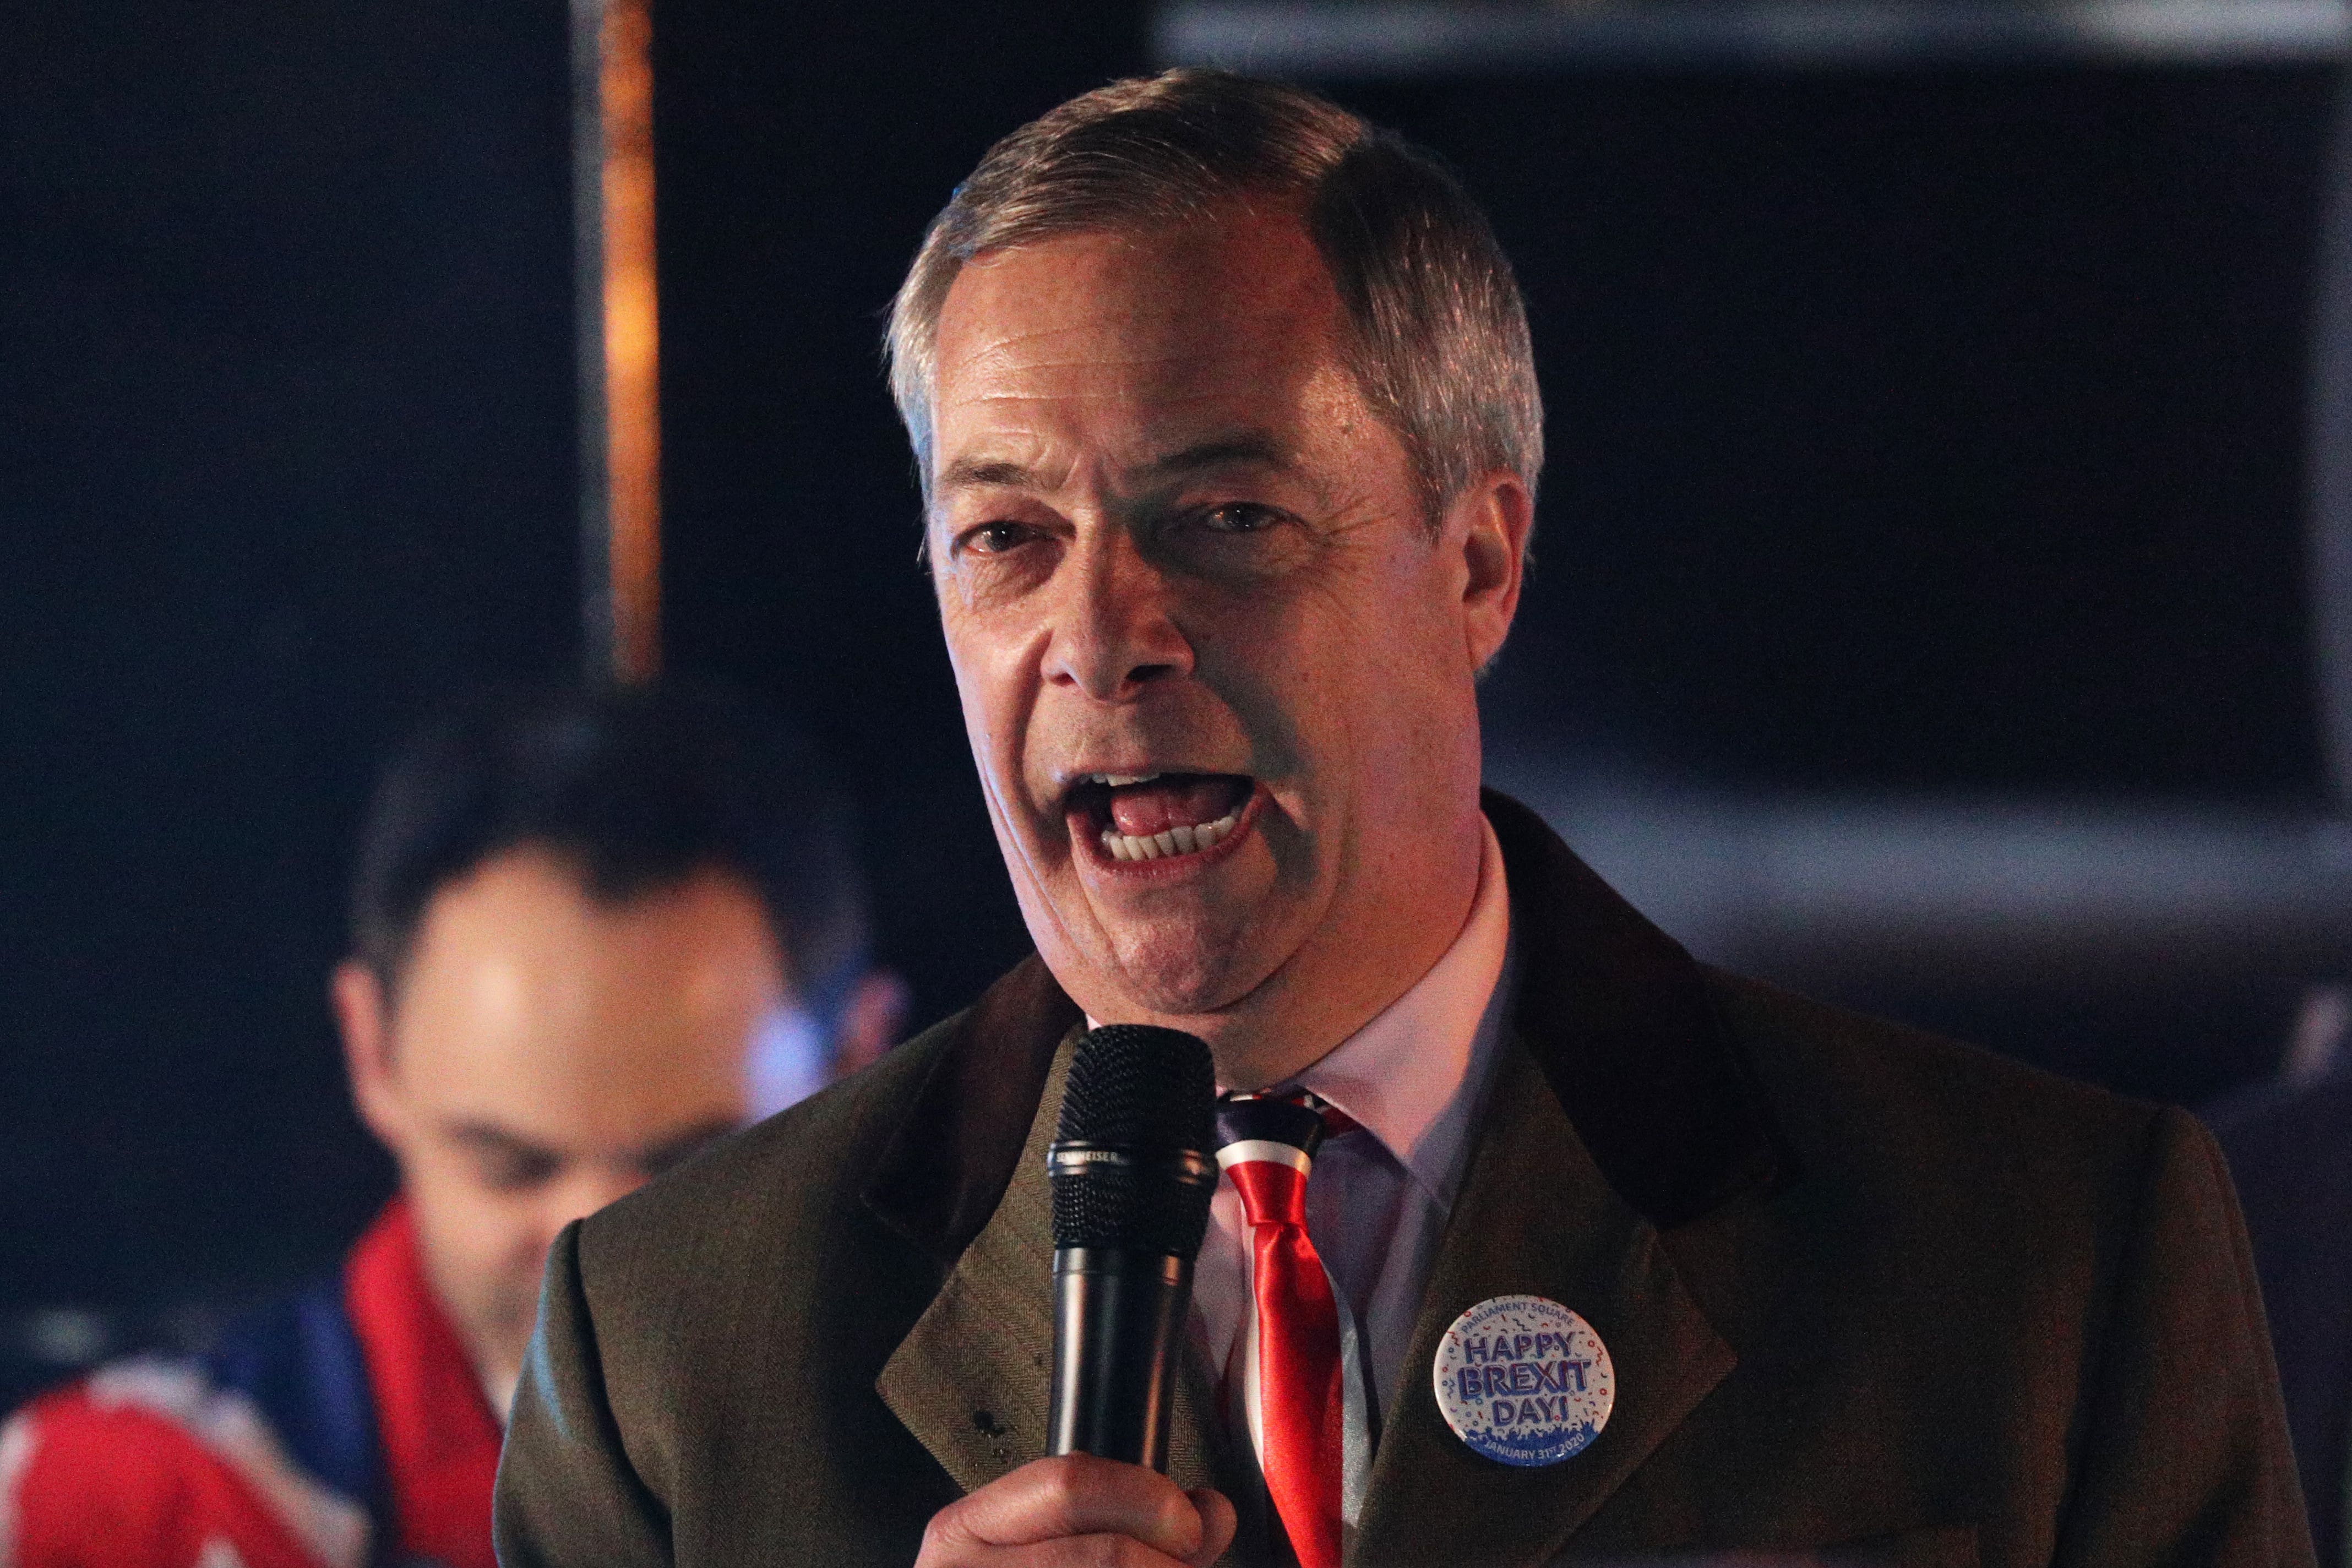 Private bank Coutts decided to close Nigel Farage’s bank account